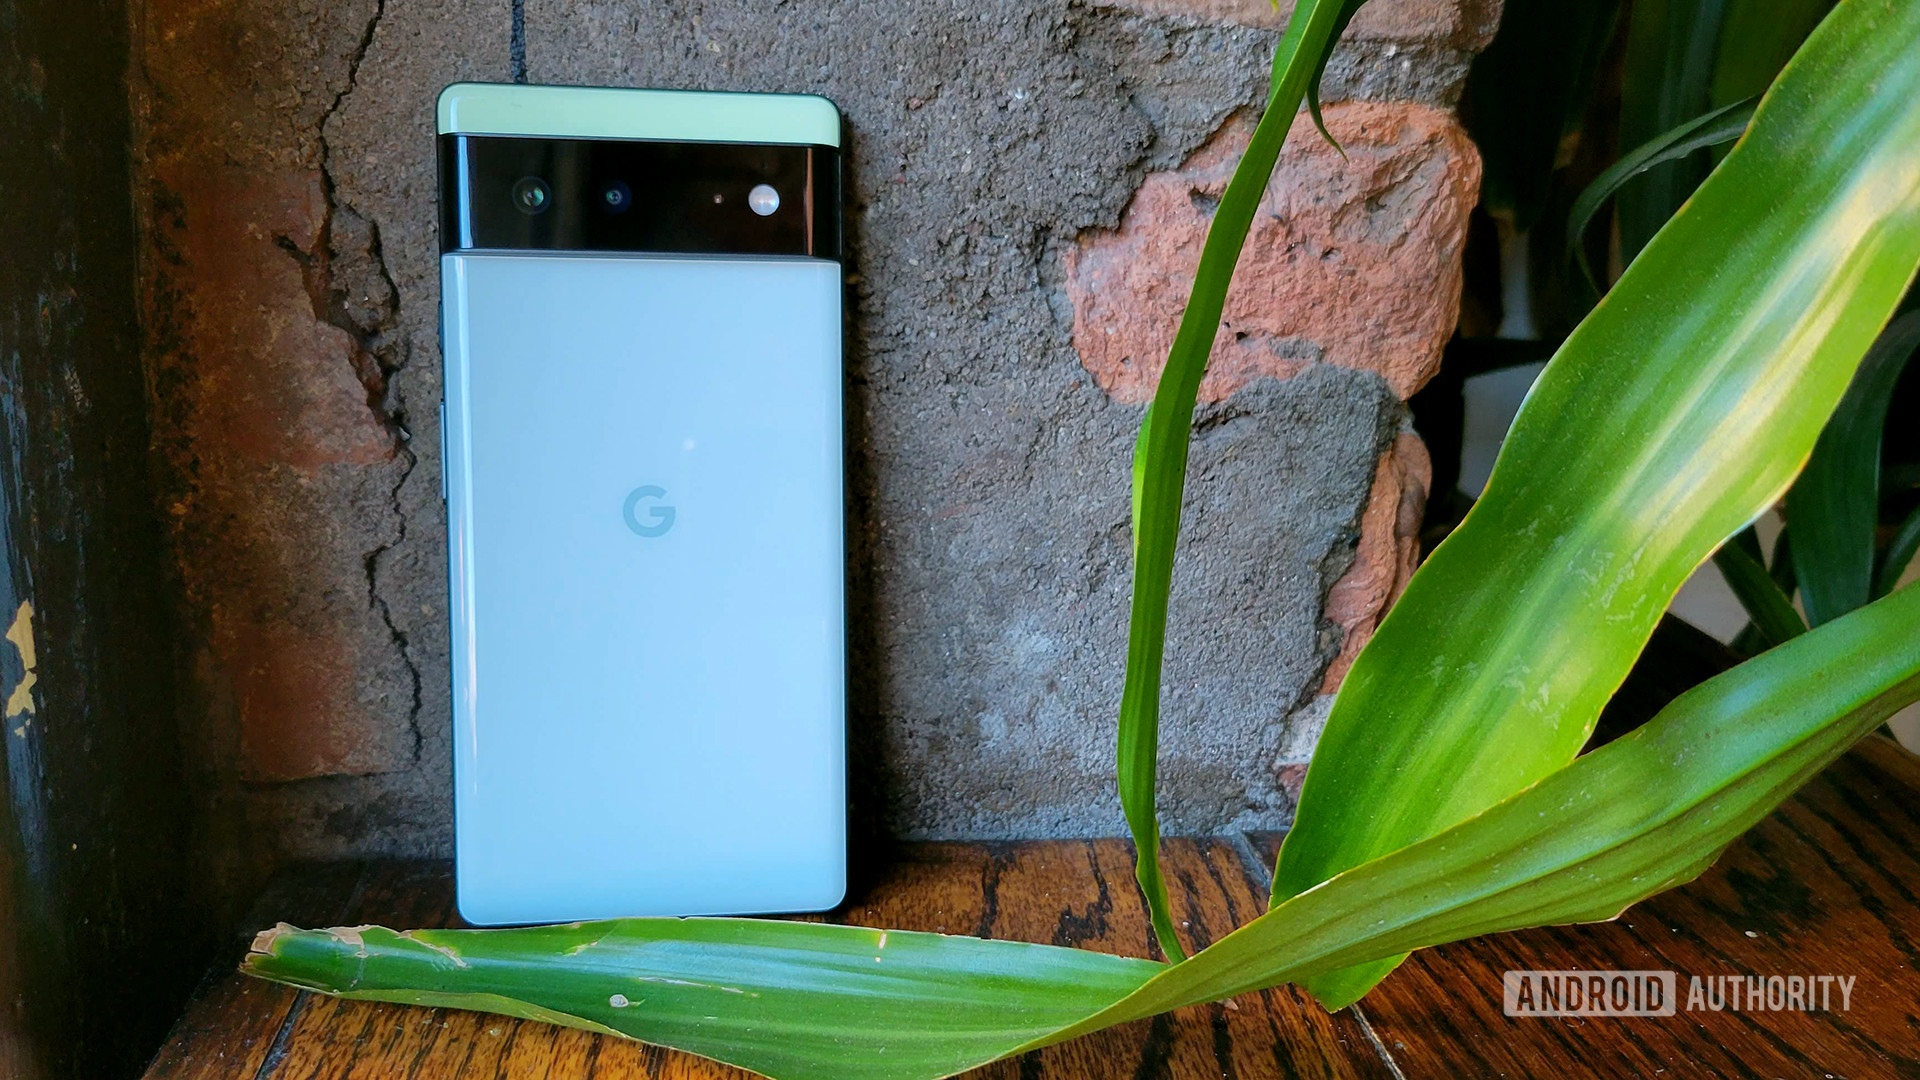 Google Pixel 6 against wall with plants